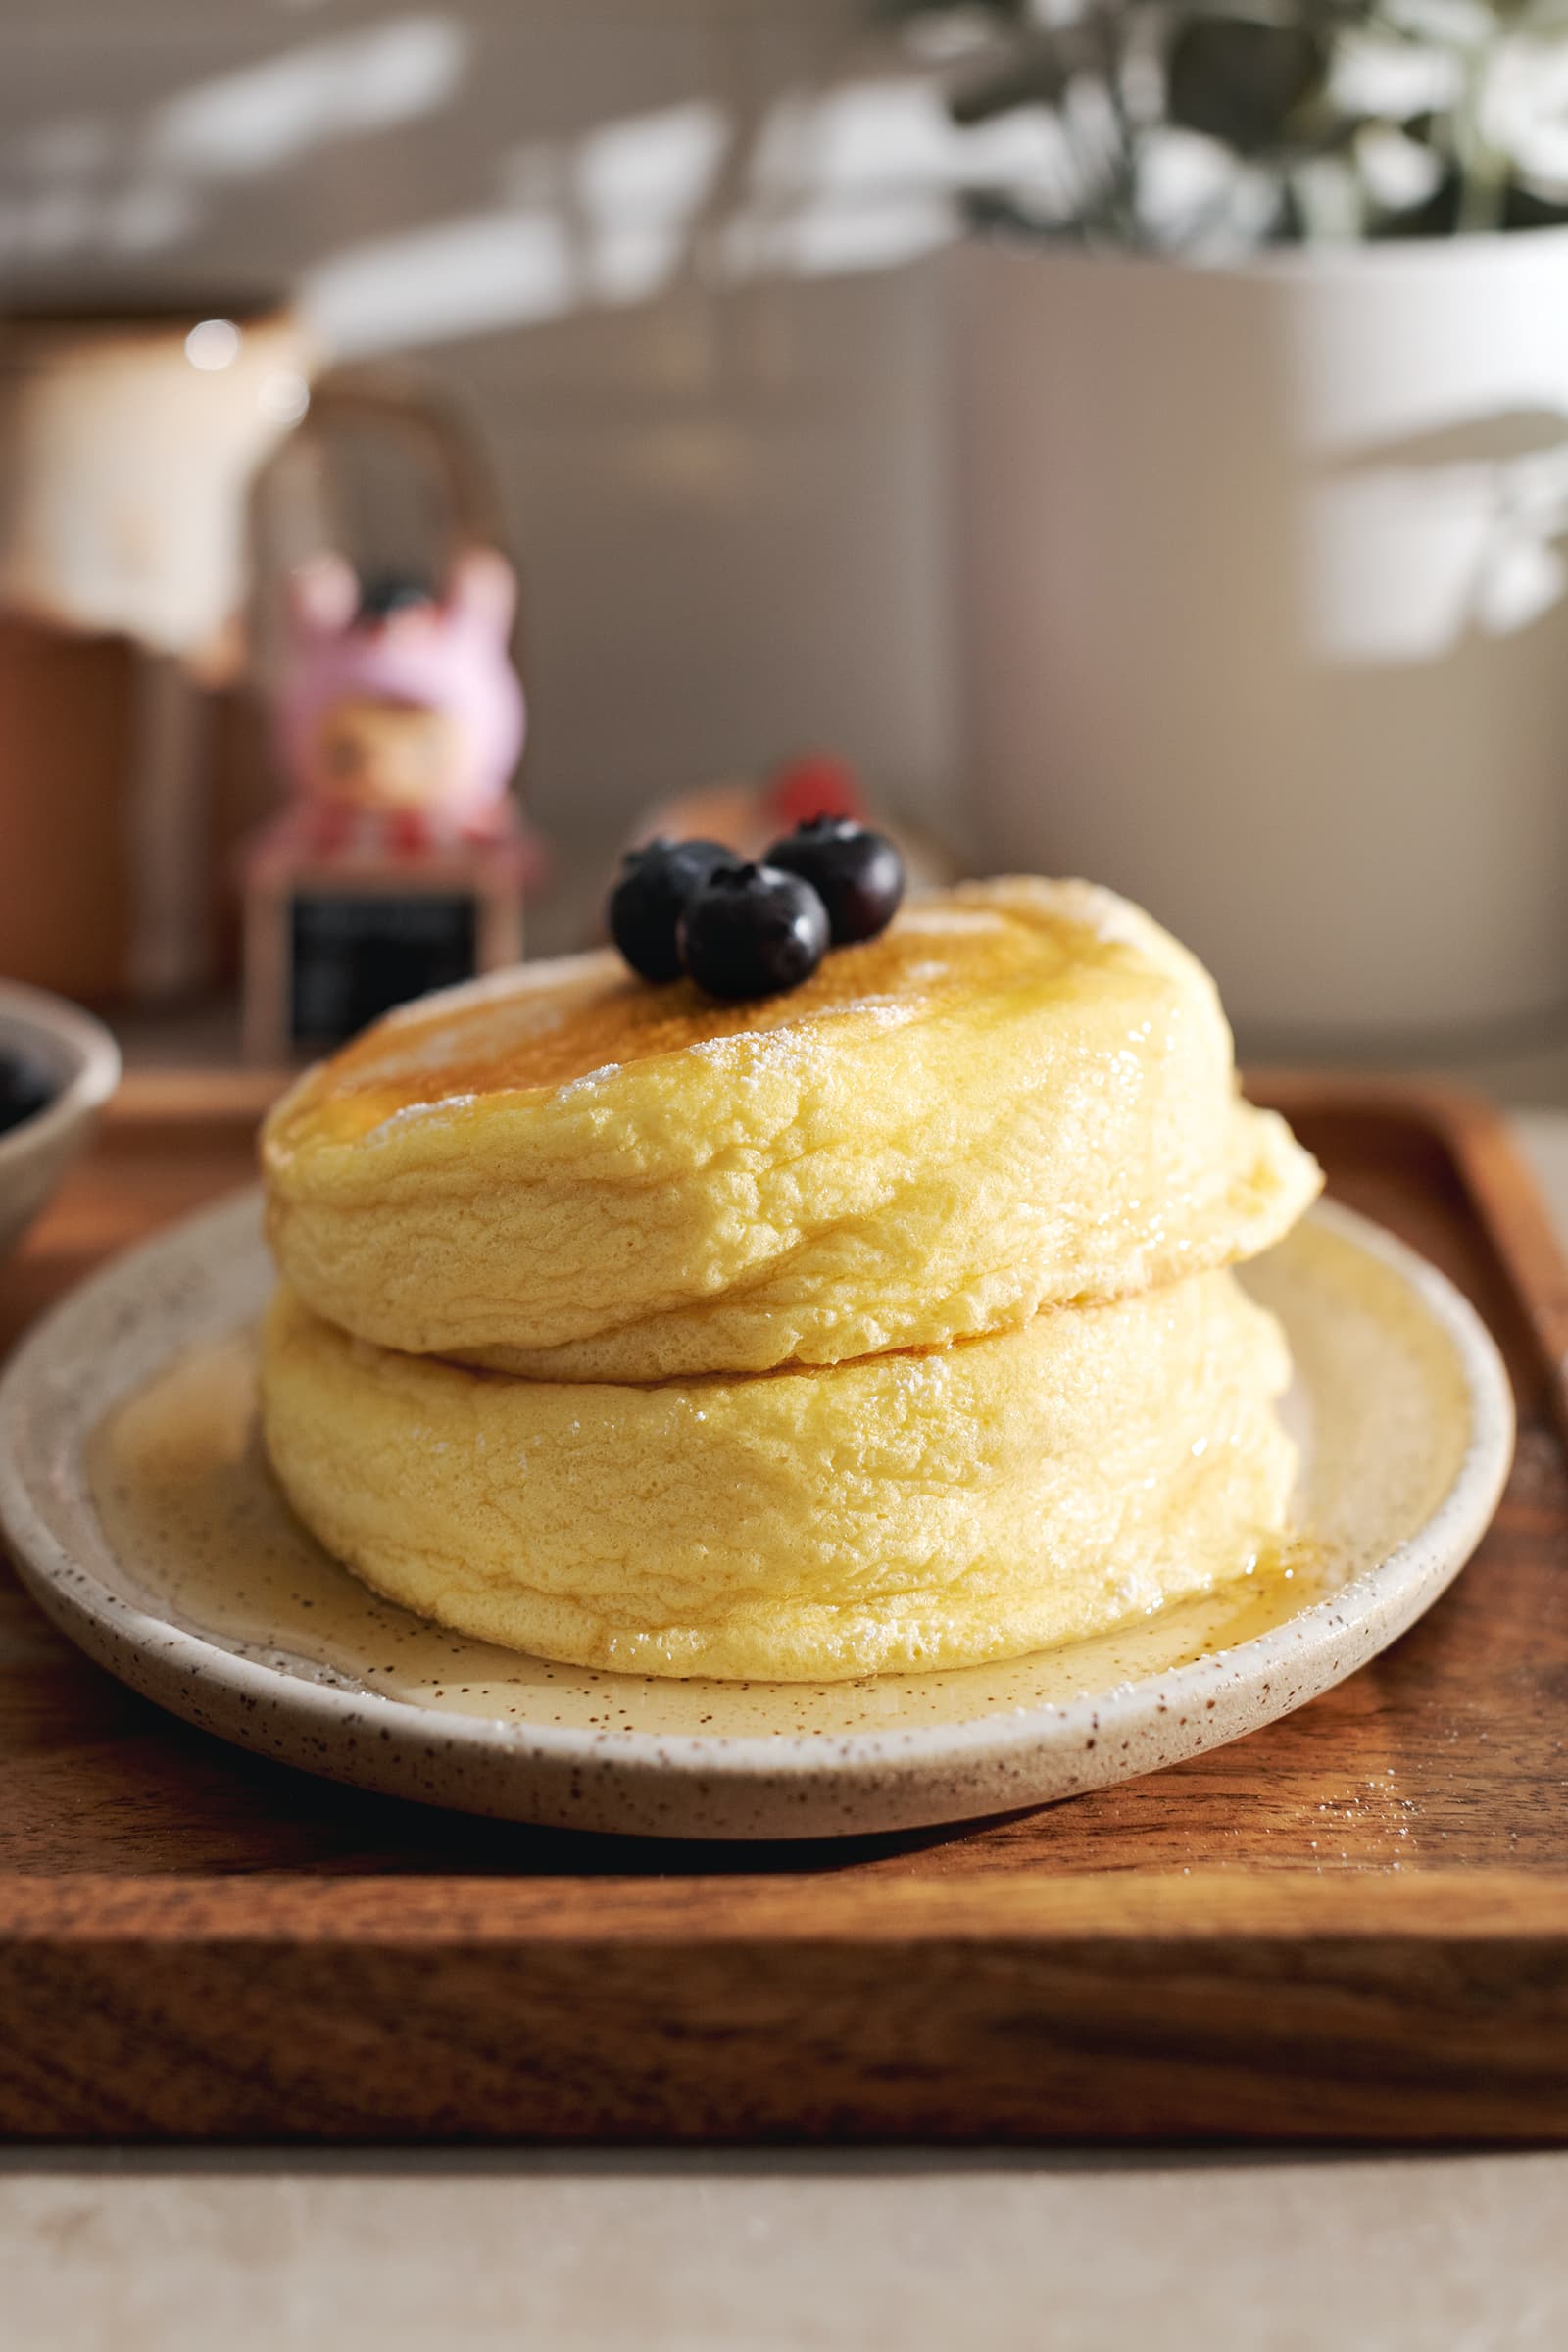 A stack of two Japanese souffle pancakes on a plate.